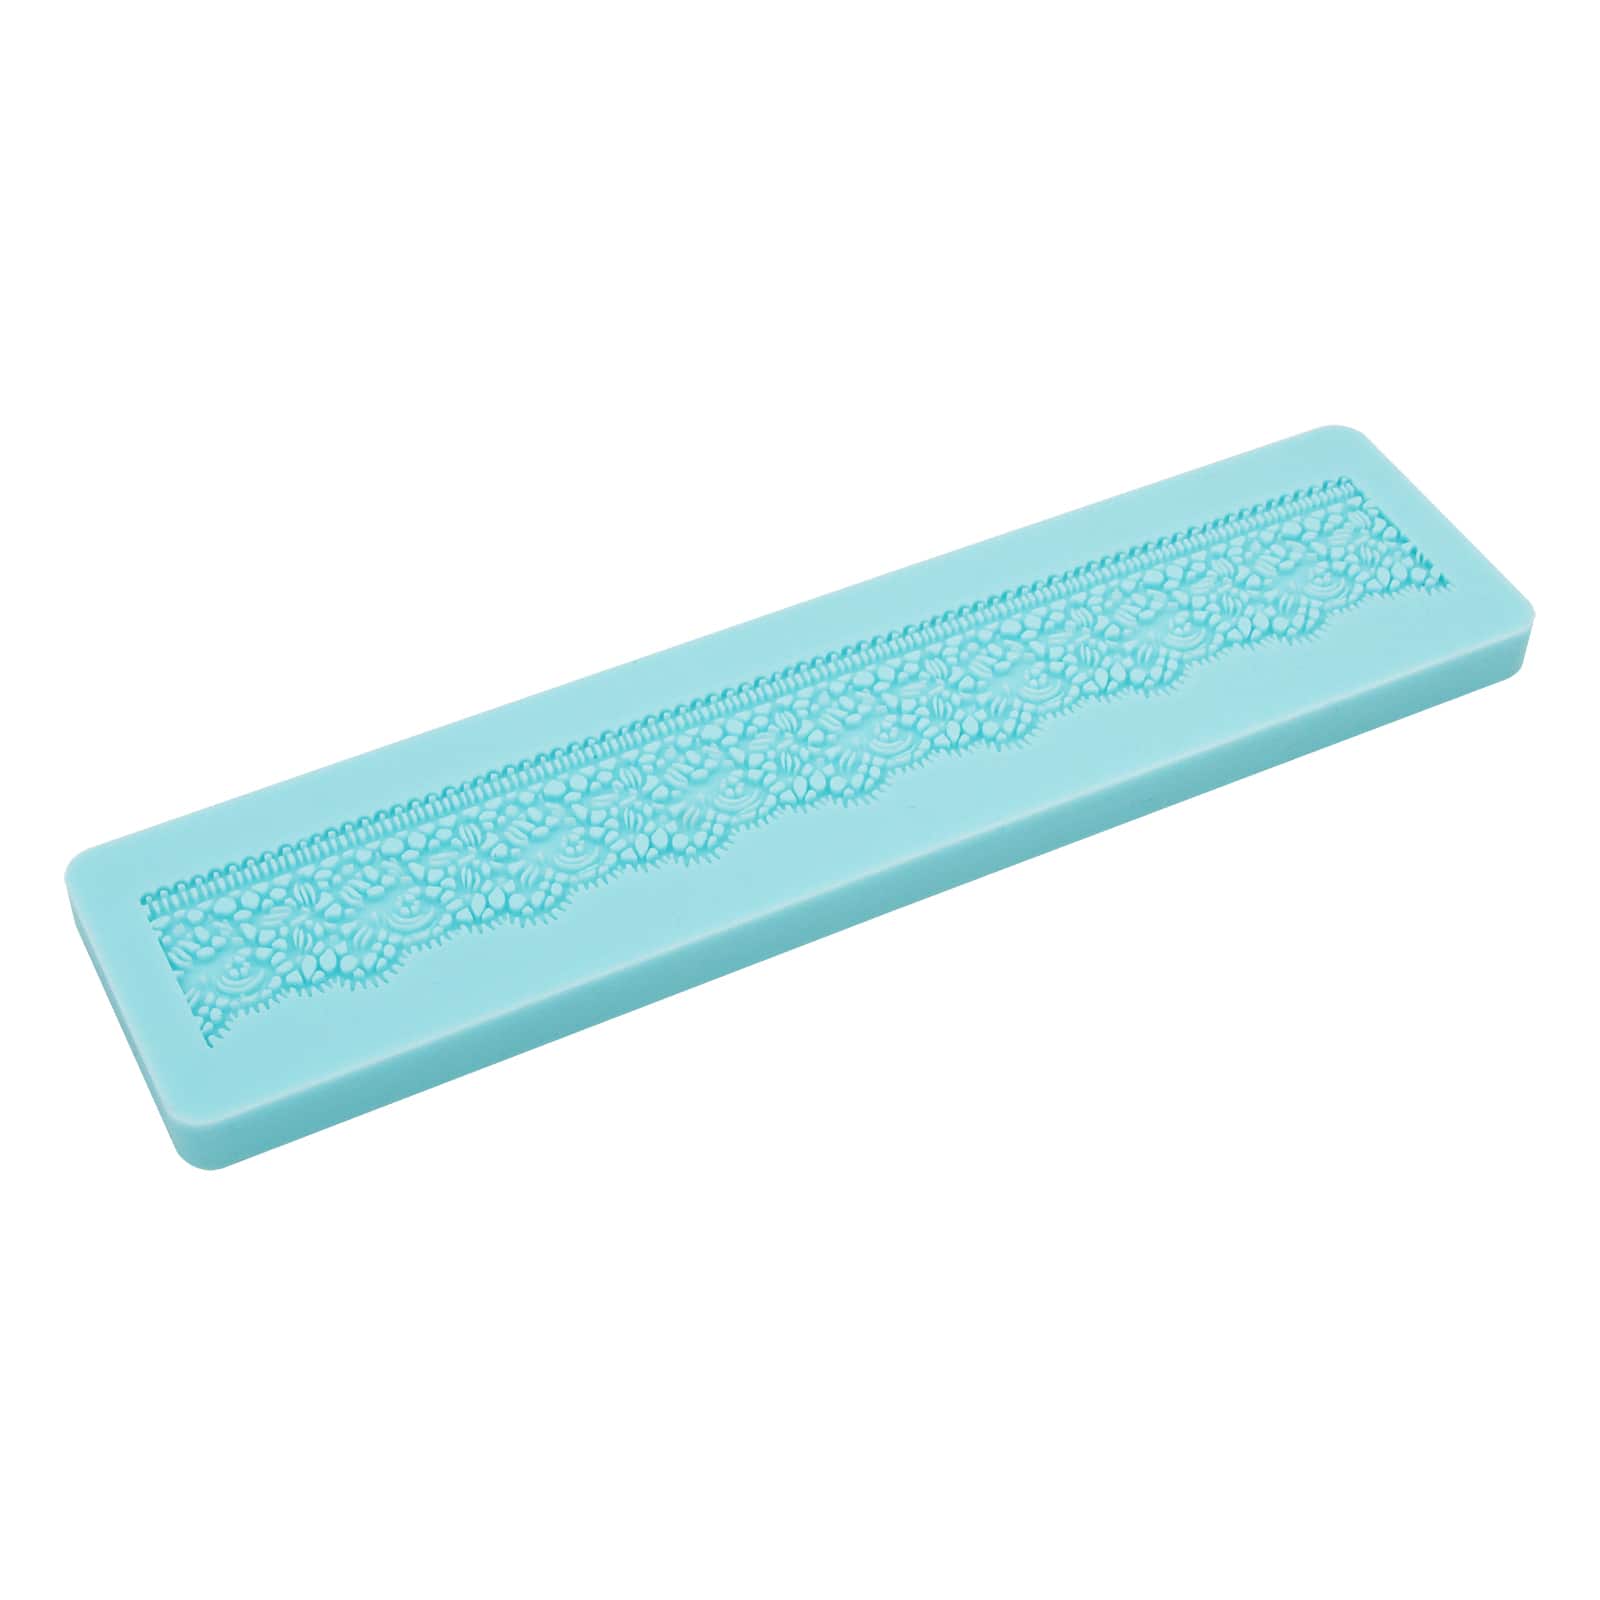 6 Pack: Lace Silicone Fondant Border Mold by Celebrate It&#xAE;